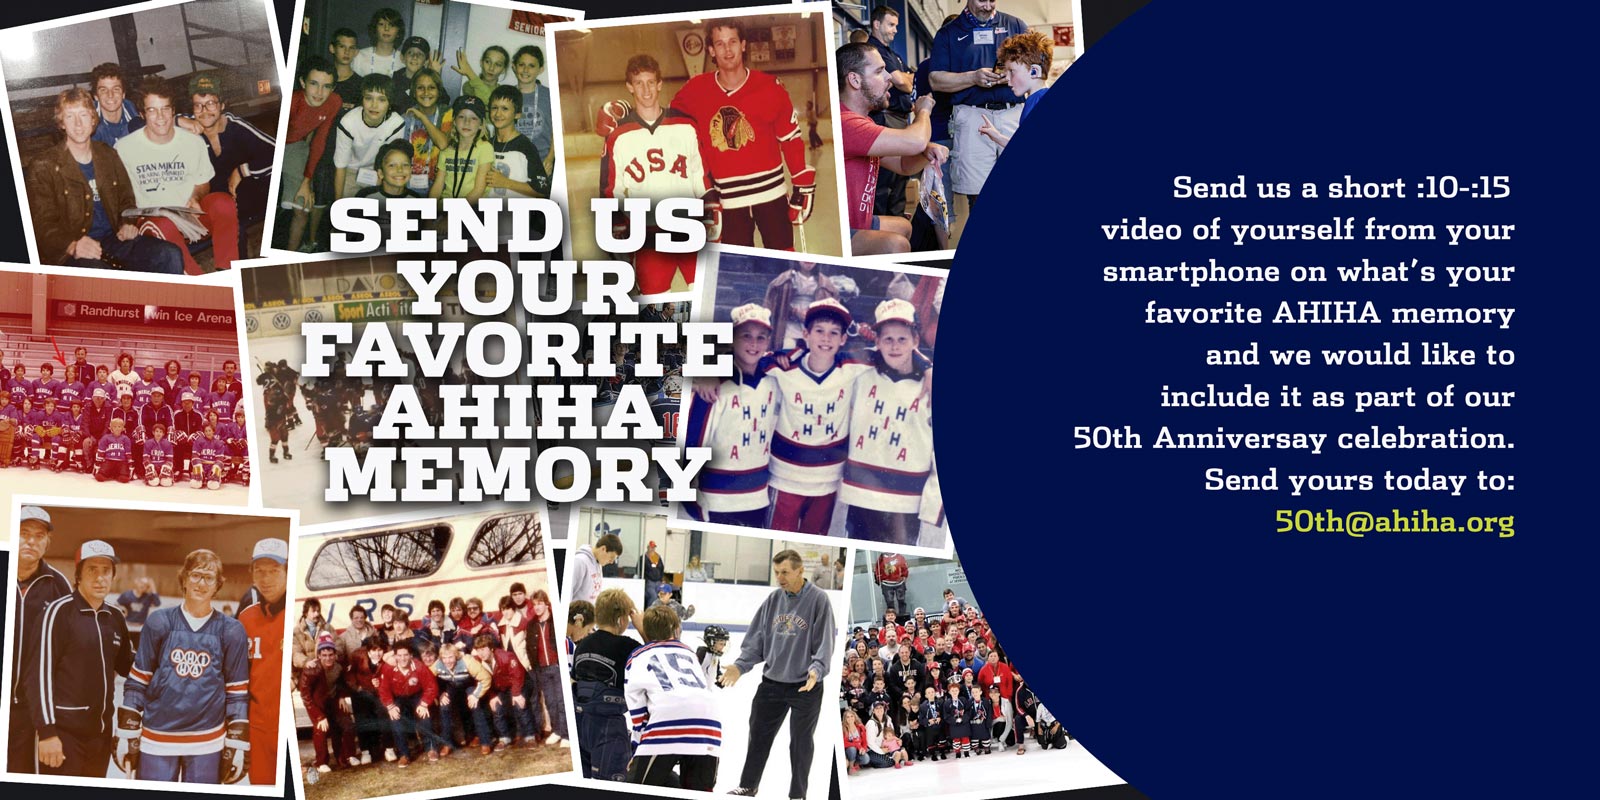 Send us a short video of yourself on what's your favorite AHIHA memory.